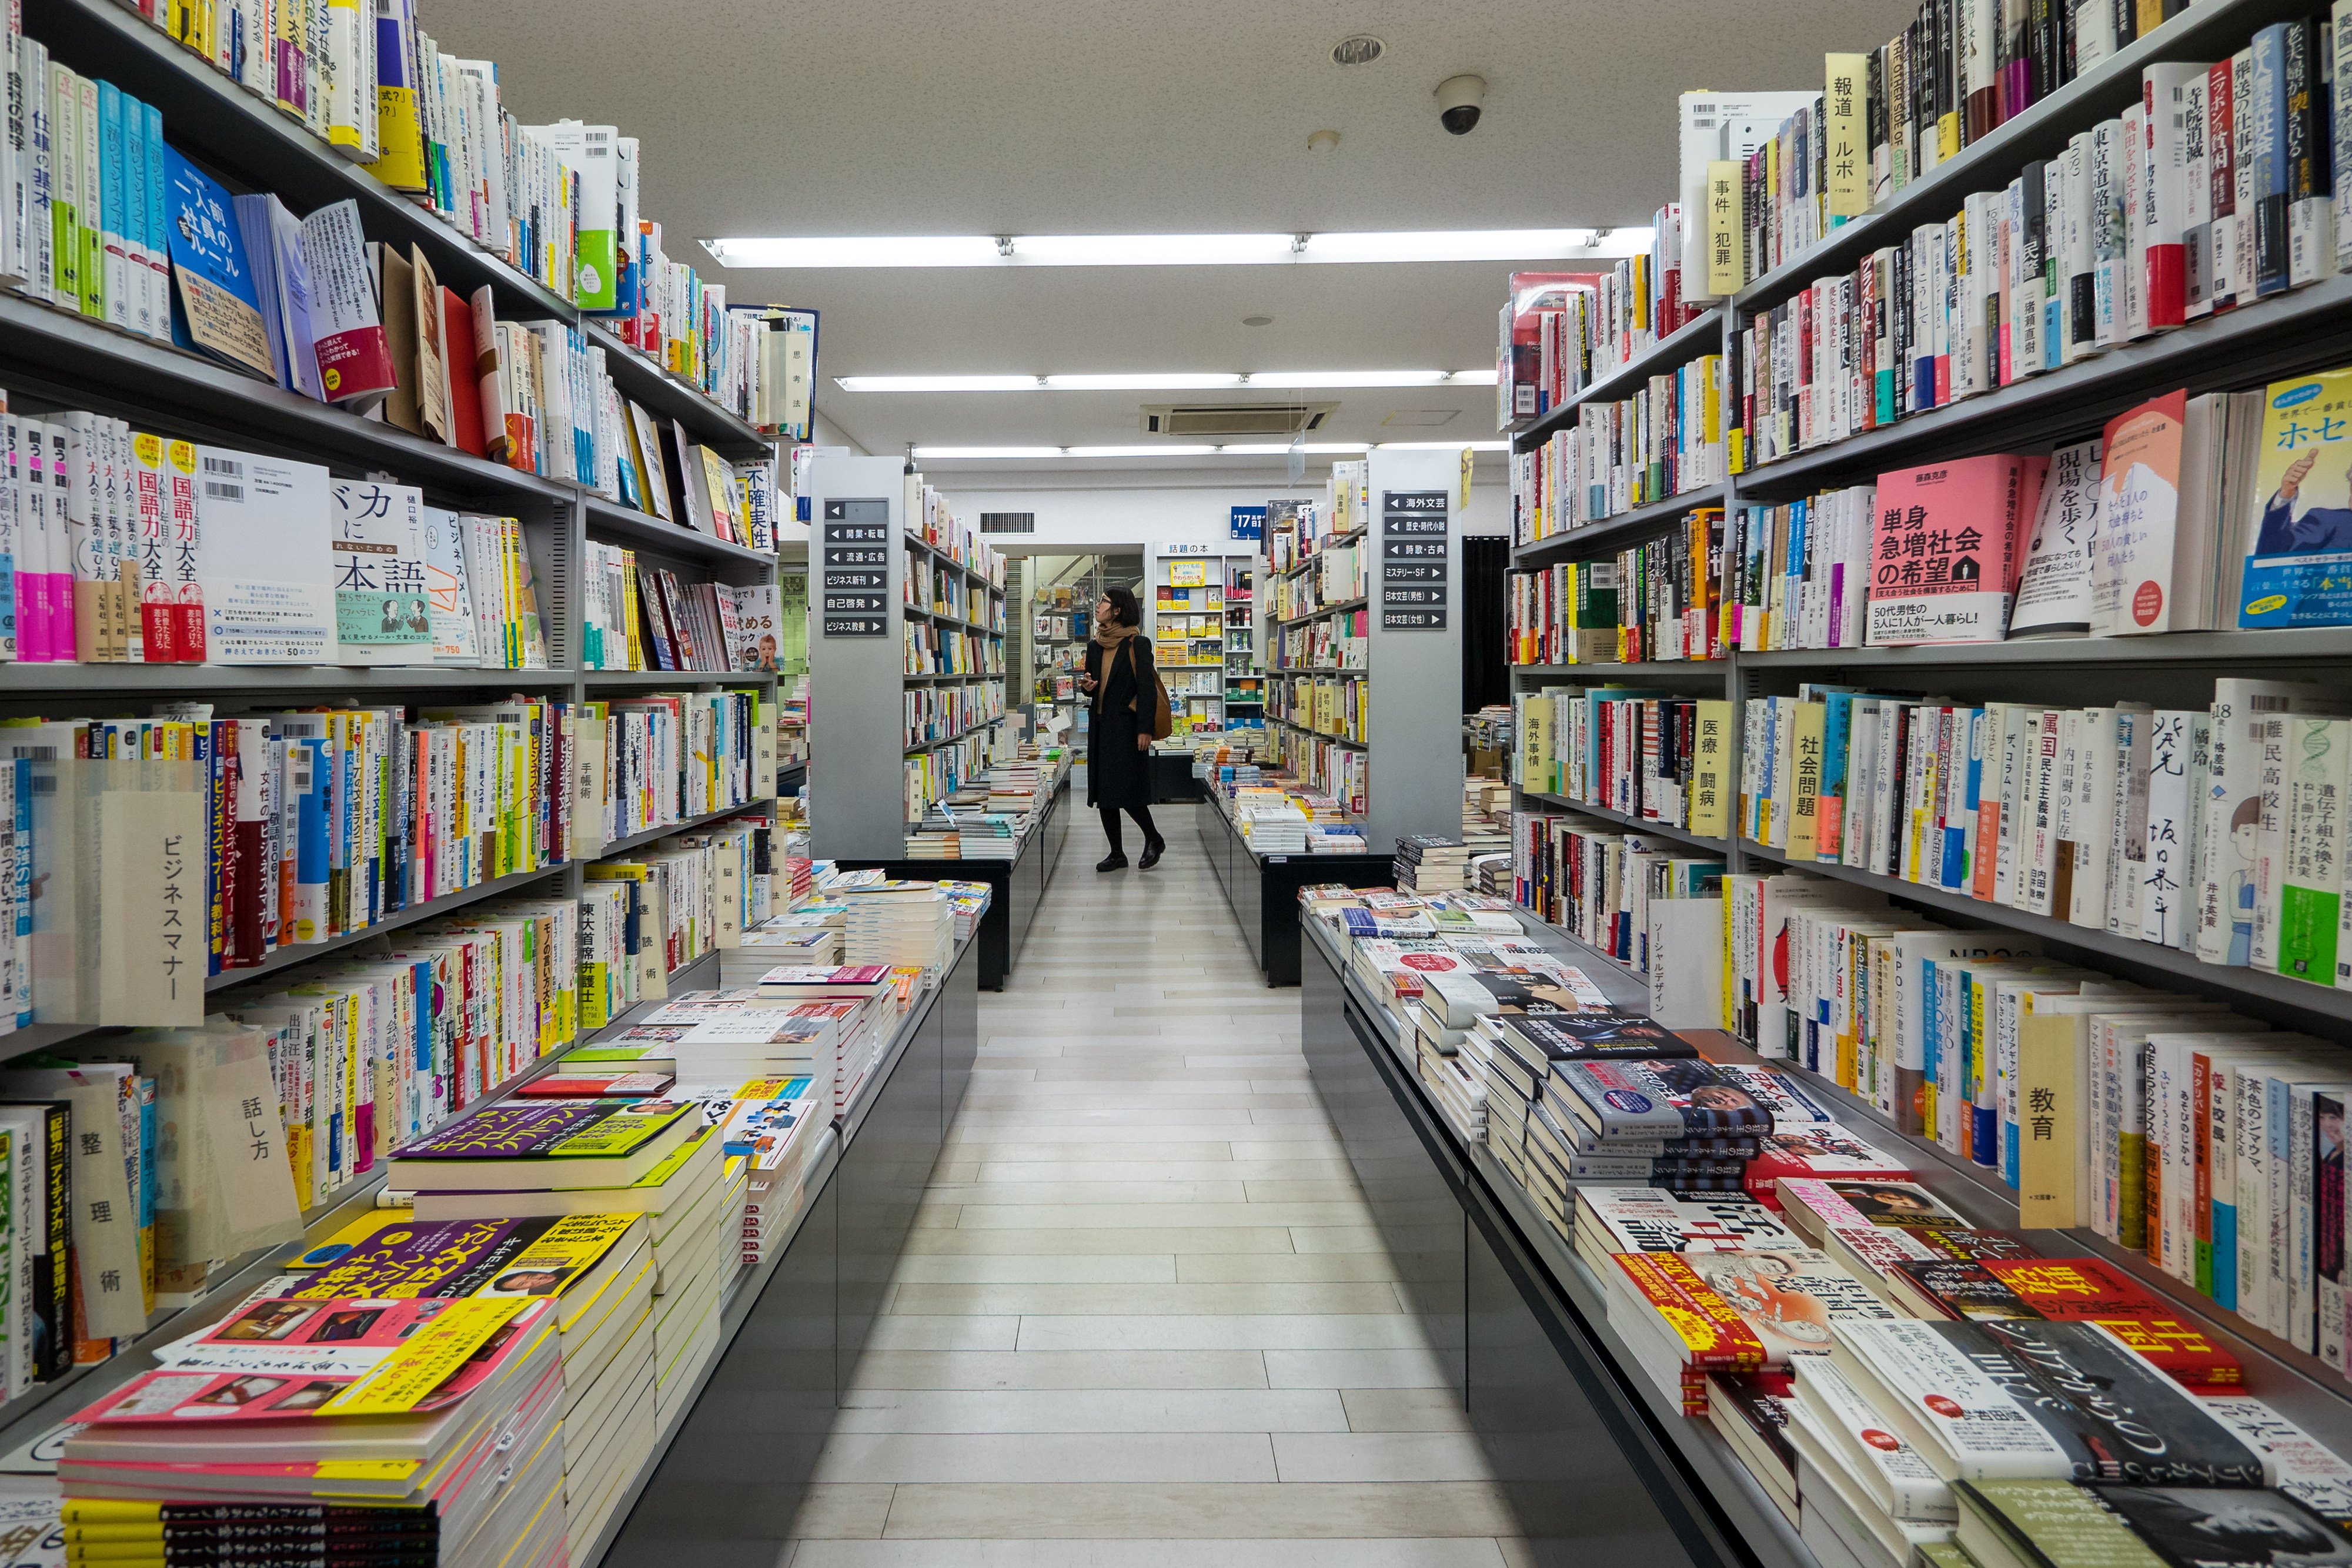 A customer browses books at a store in Tokyo, Japan. Photo: Shutterstock 